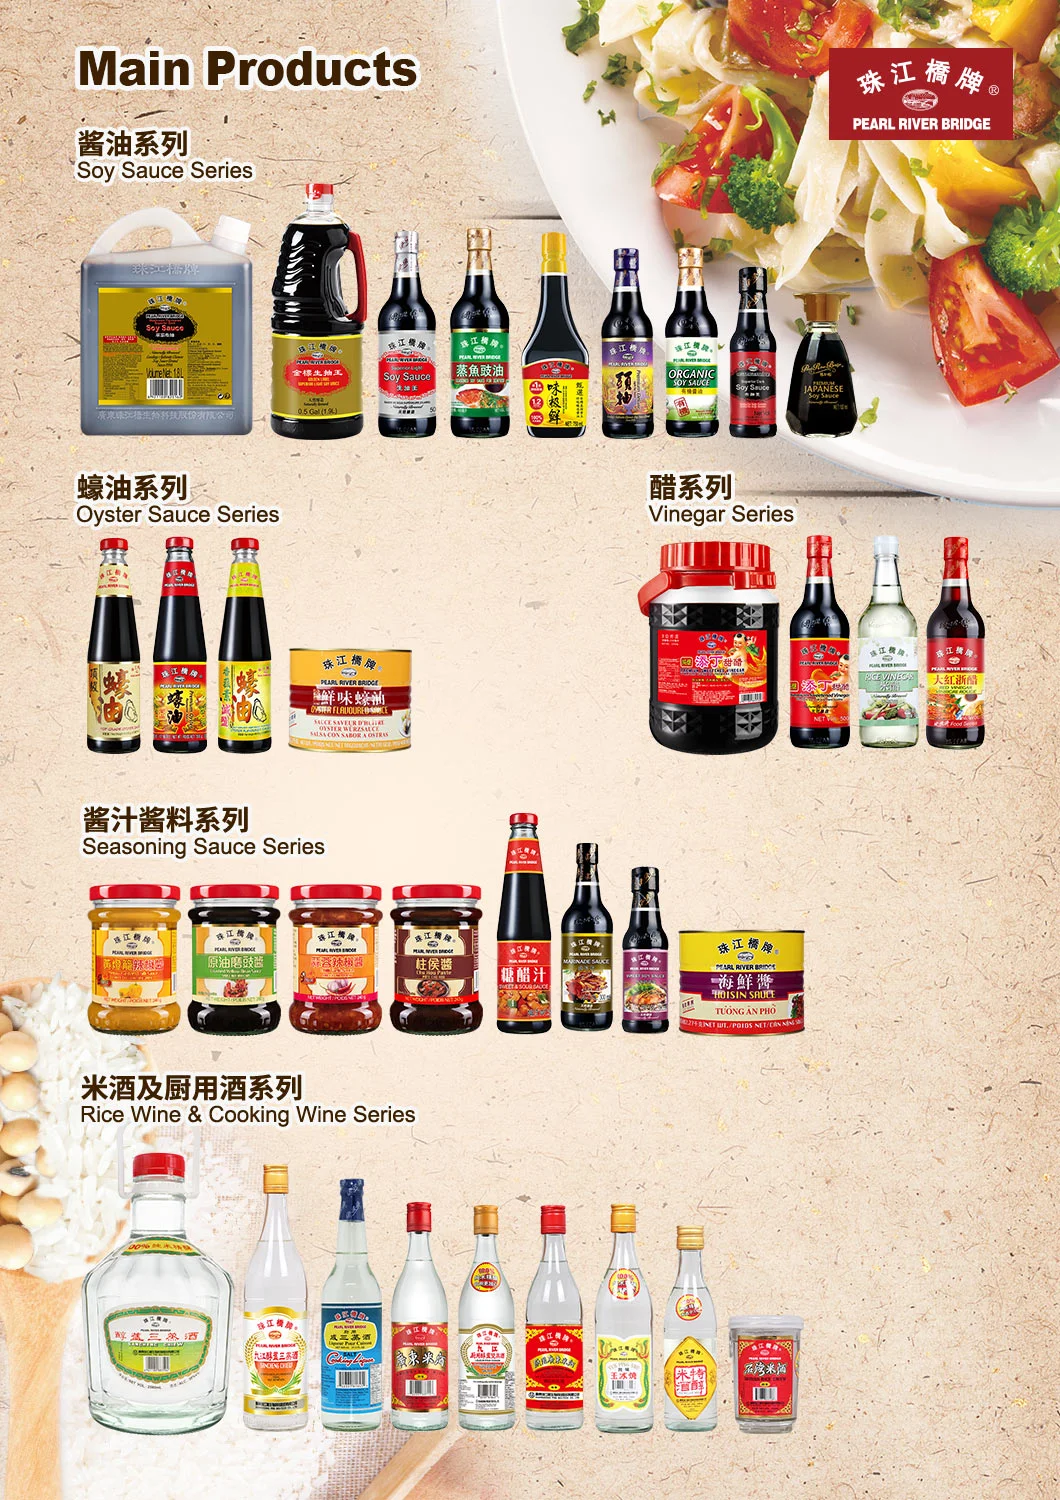 Pearl River Bridge Premium Delicious Light Soy Sauce 500ml Healthy and High Quality Food Additive